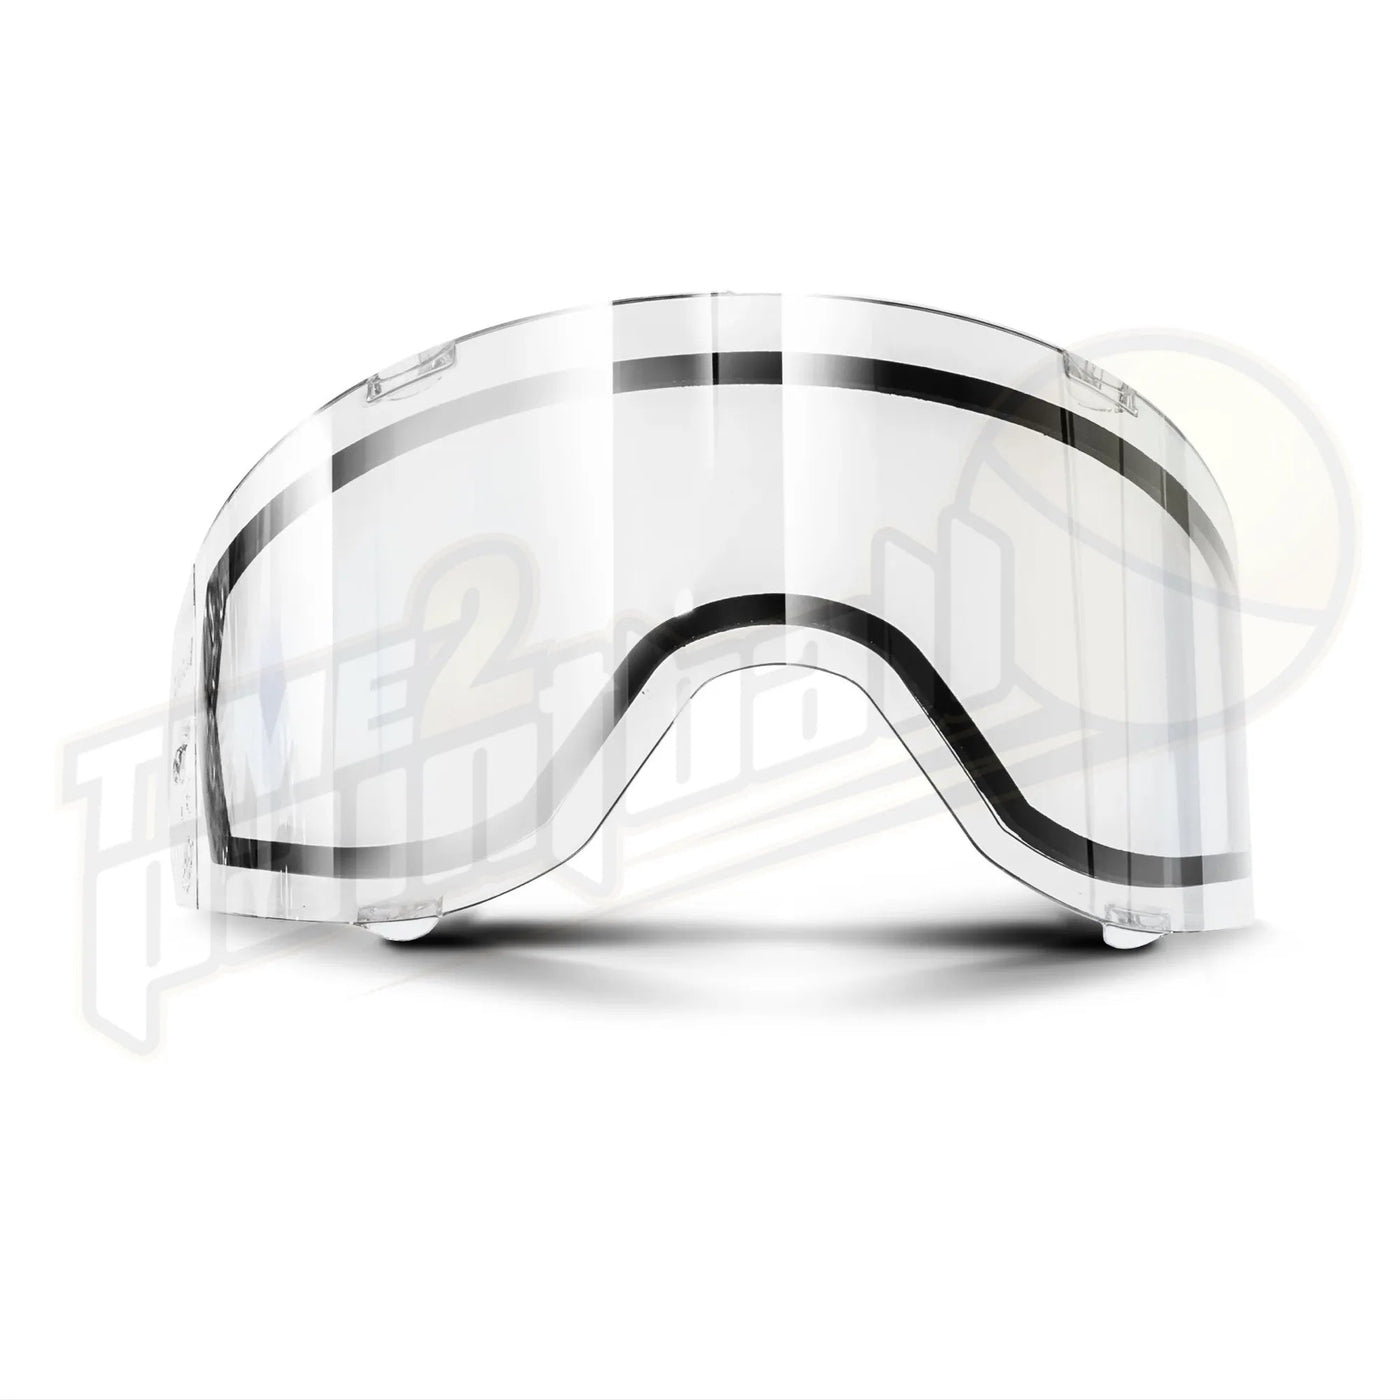 HK Army HSTL Thermal Lens CLEAR - Time 2 Paintball